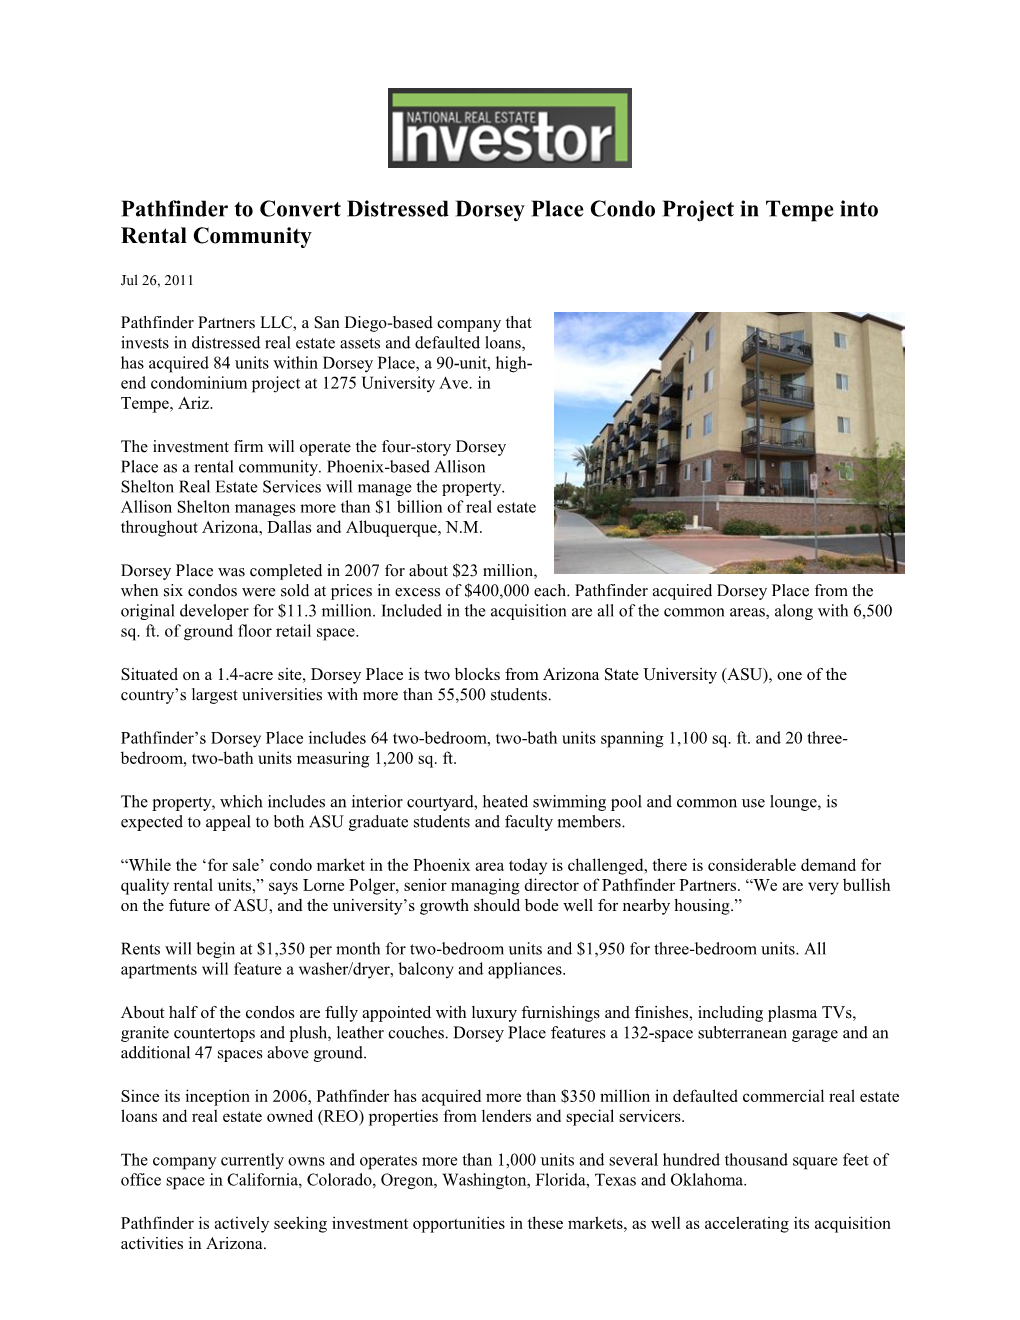 Pathfinder to Convert Distressed Dorsey Place Condo Project in Tempe Into Rental Community